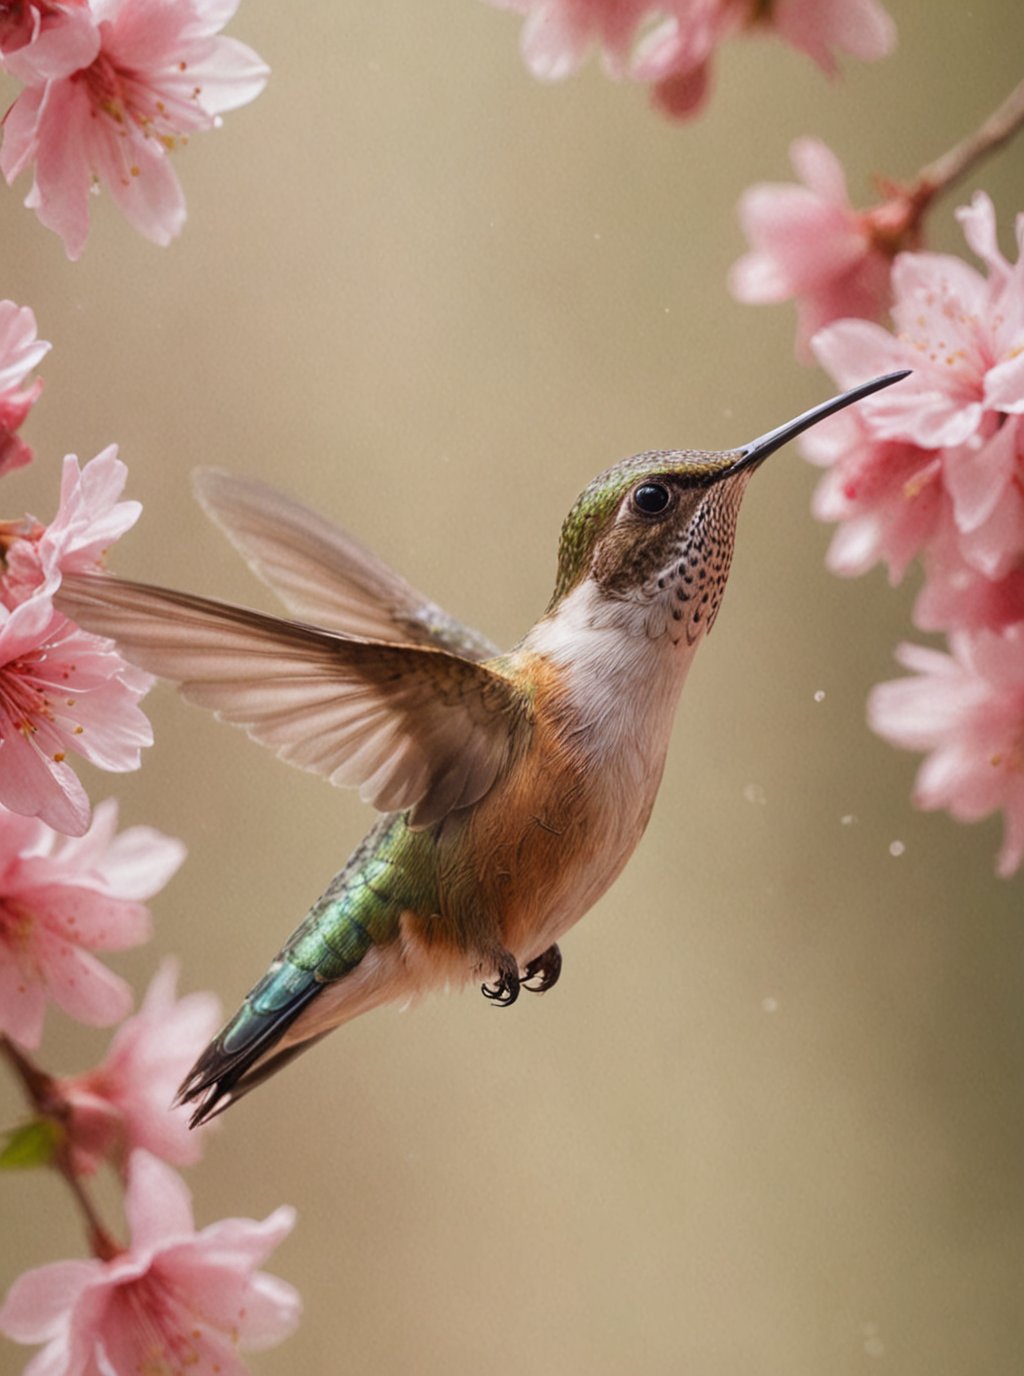 Up-close shot of delicate cherry blossom petals suspended in mid-air, gently swaying and soft-focus blurred. The hummingbird's wings beat rapidly as it flies towards the camera, its iridescent feathers glistening in warm sunlight. Background a soft blur, emphasizing the tiny subject. Lifelike details and ultra-realistic display bring this intimate moment to life.